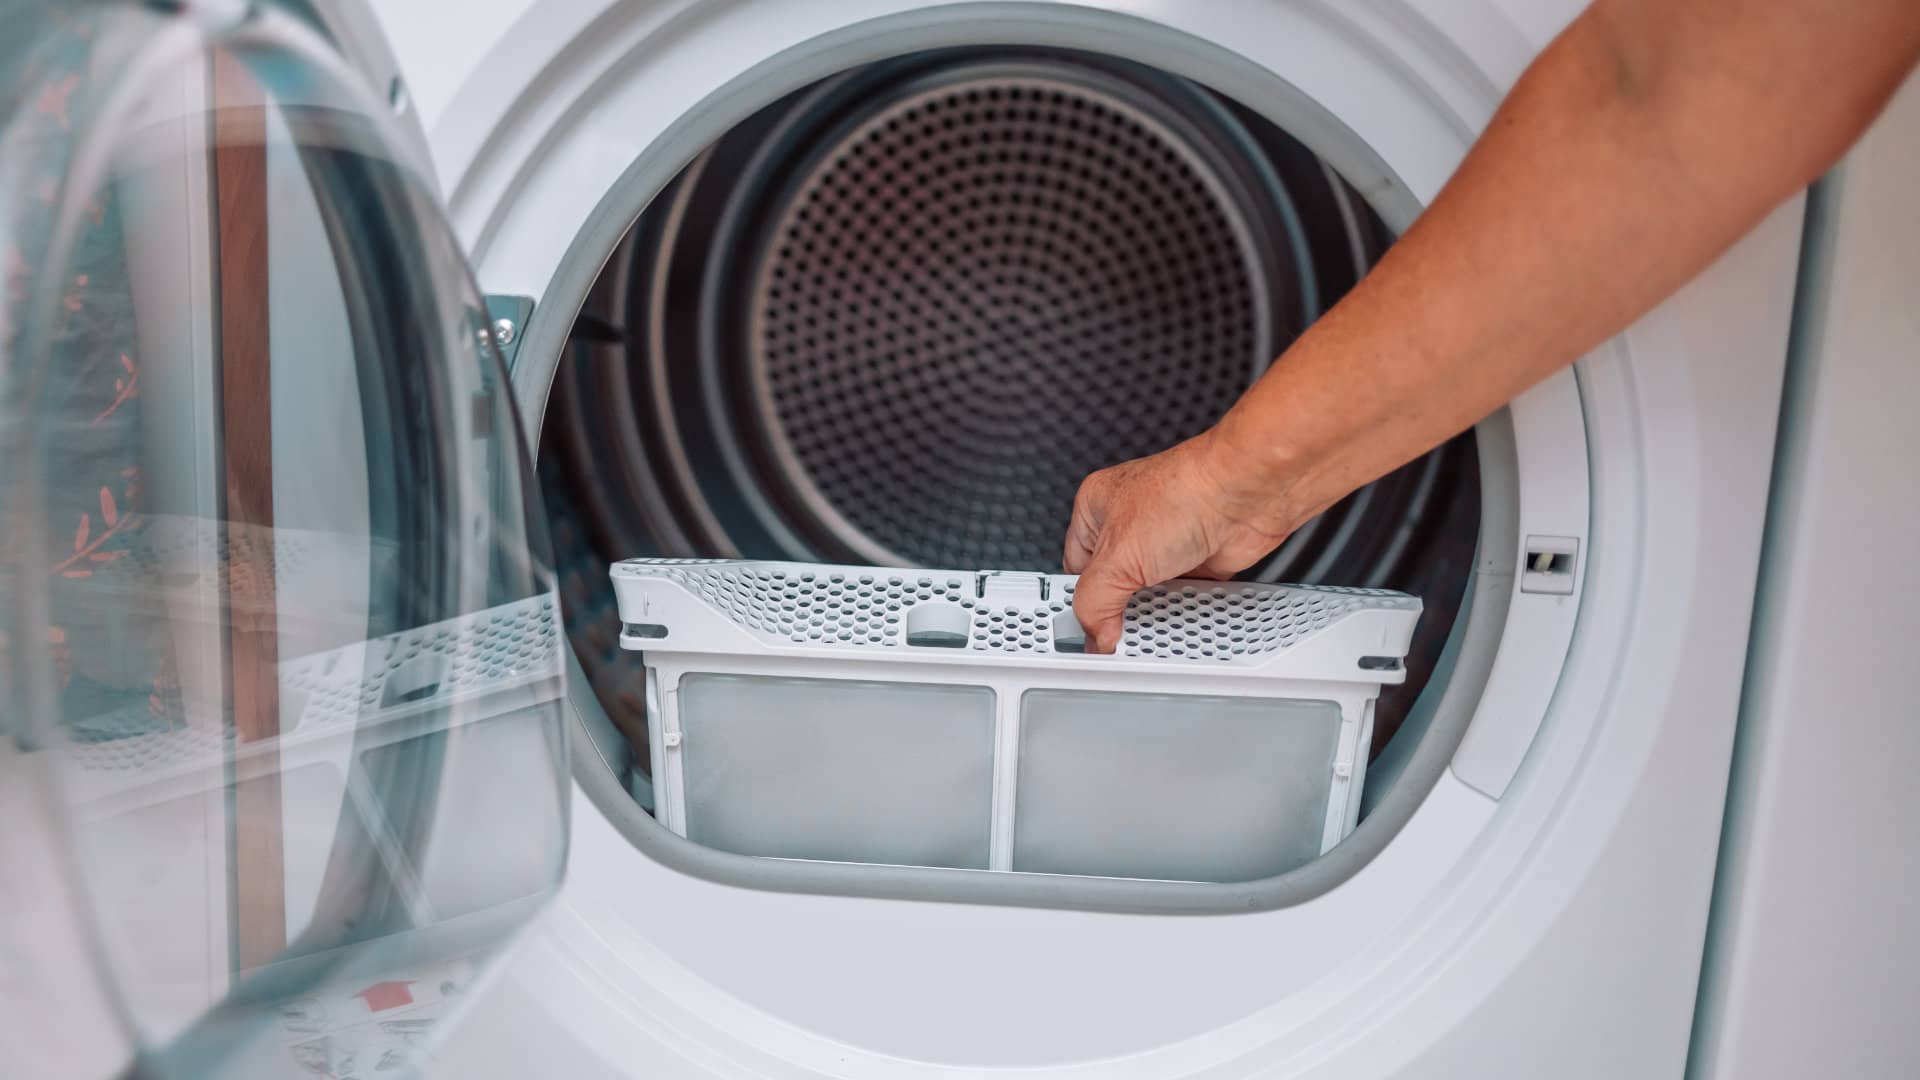 Dryer Leaking Water: 8 Easy Ways To Fix The Problem Now